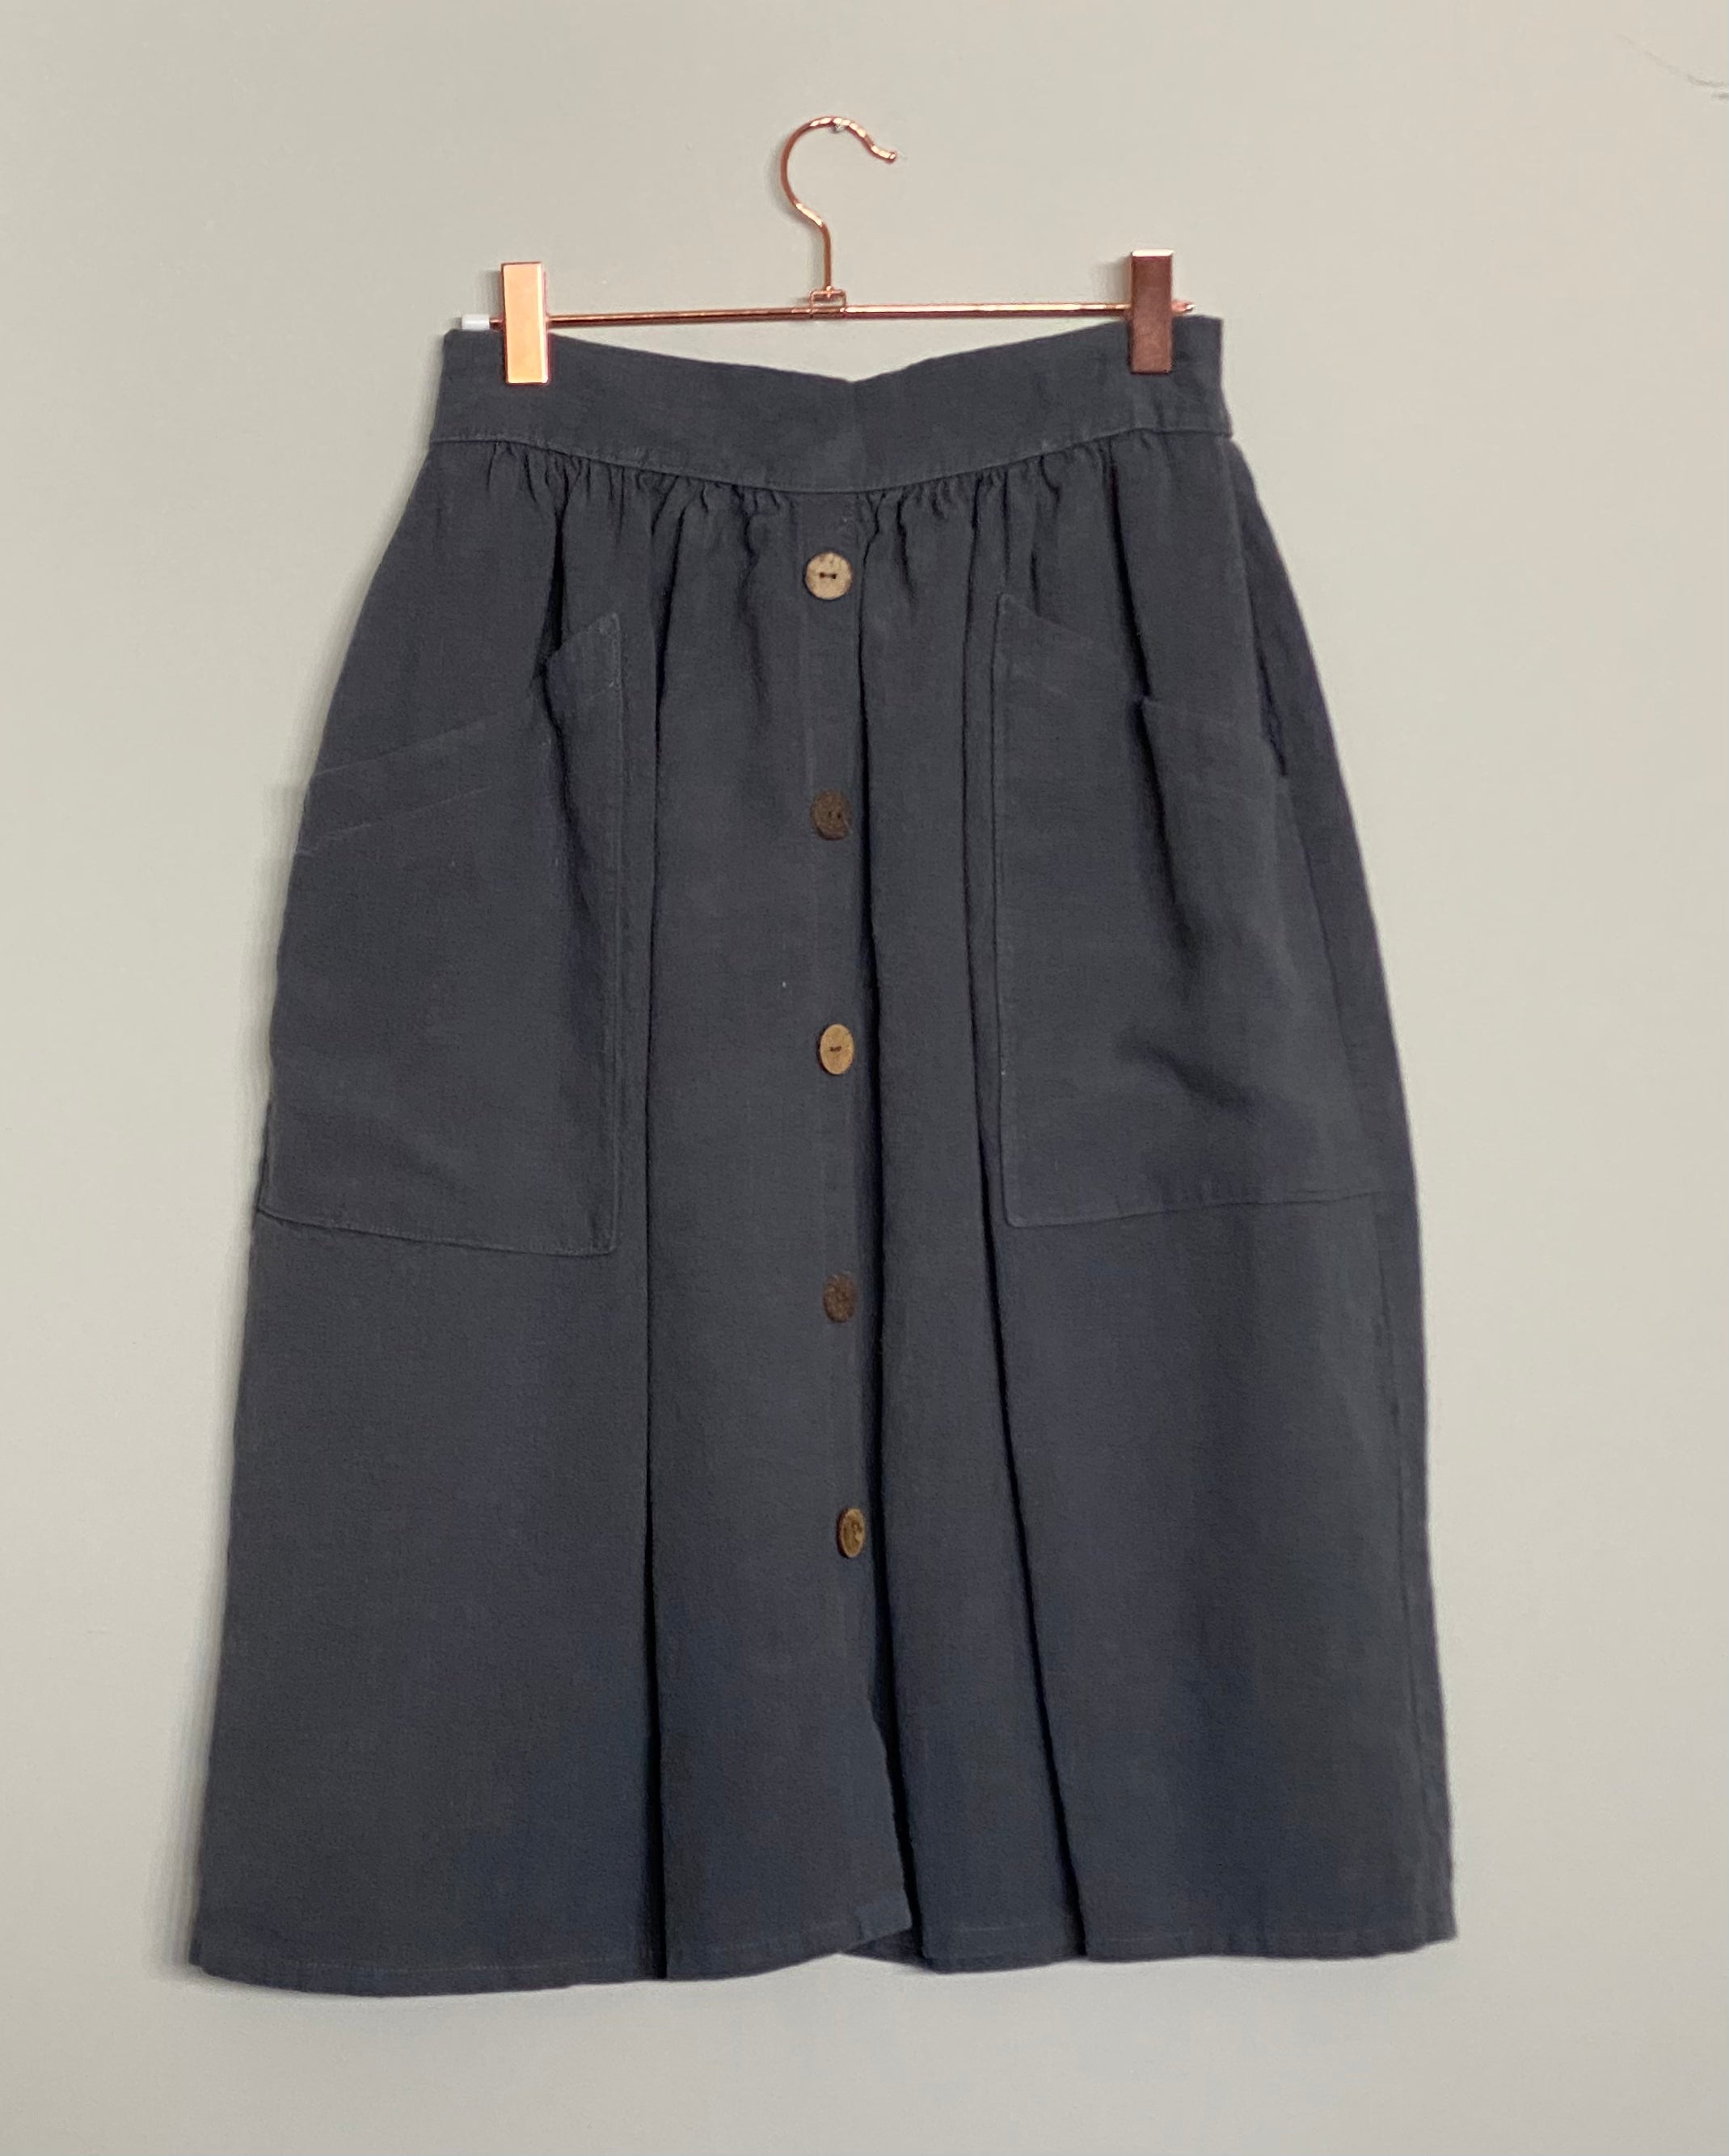 Marketplace, Small, The Skirt, Antique Linen, Steel Blue